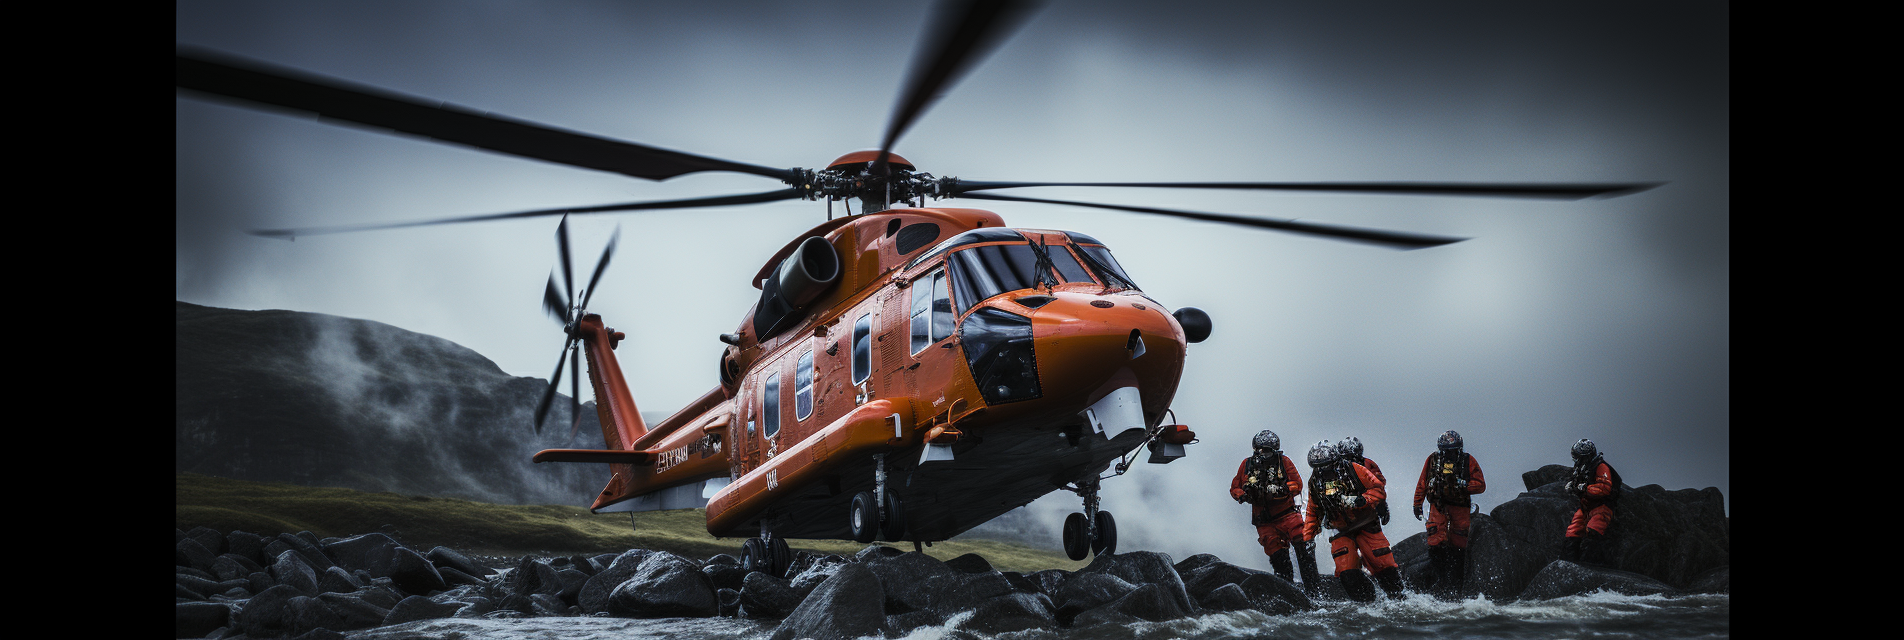 The Role of Emergency Food in the UK's Search and Rescue Operations